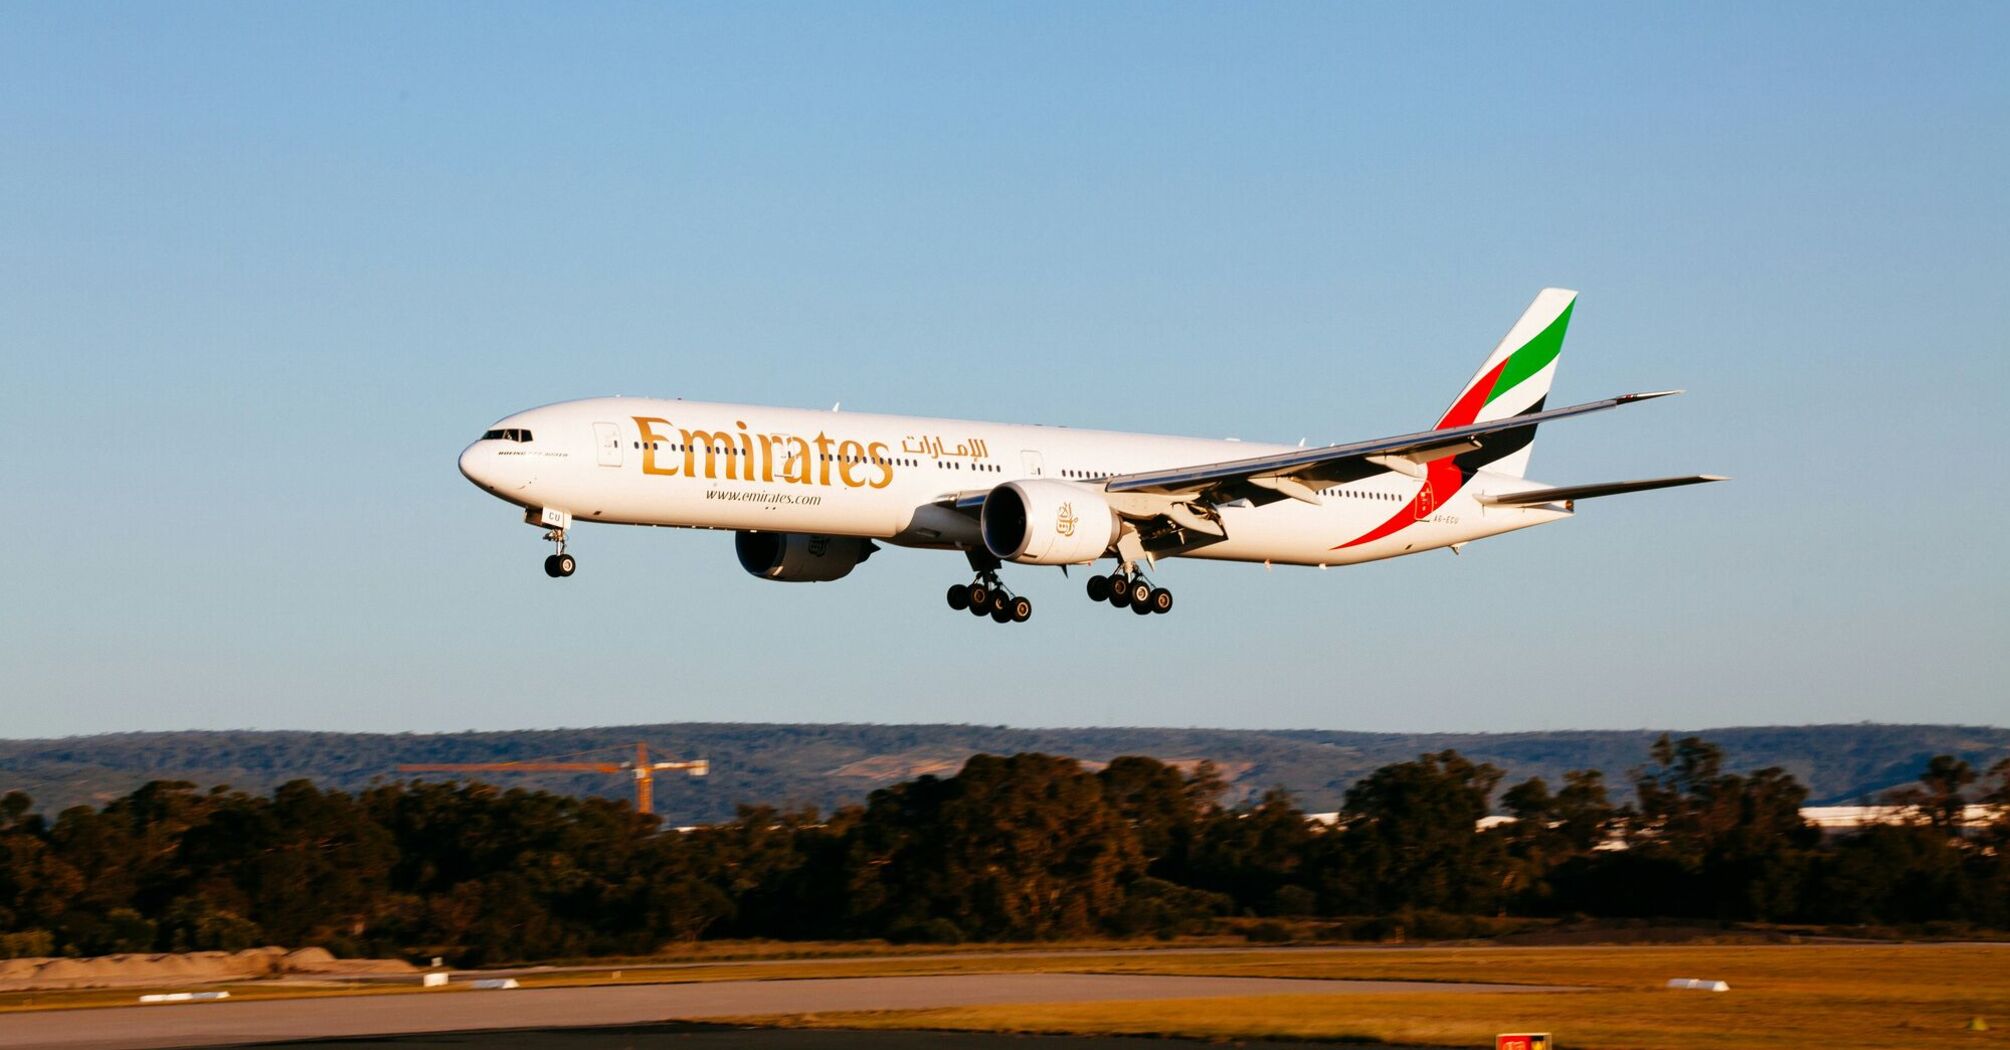 Emirates plane coming in to land